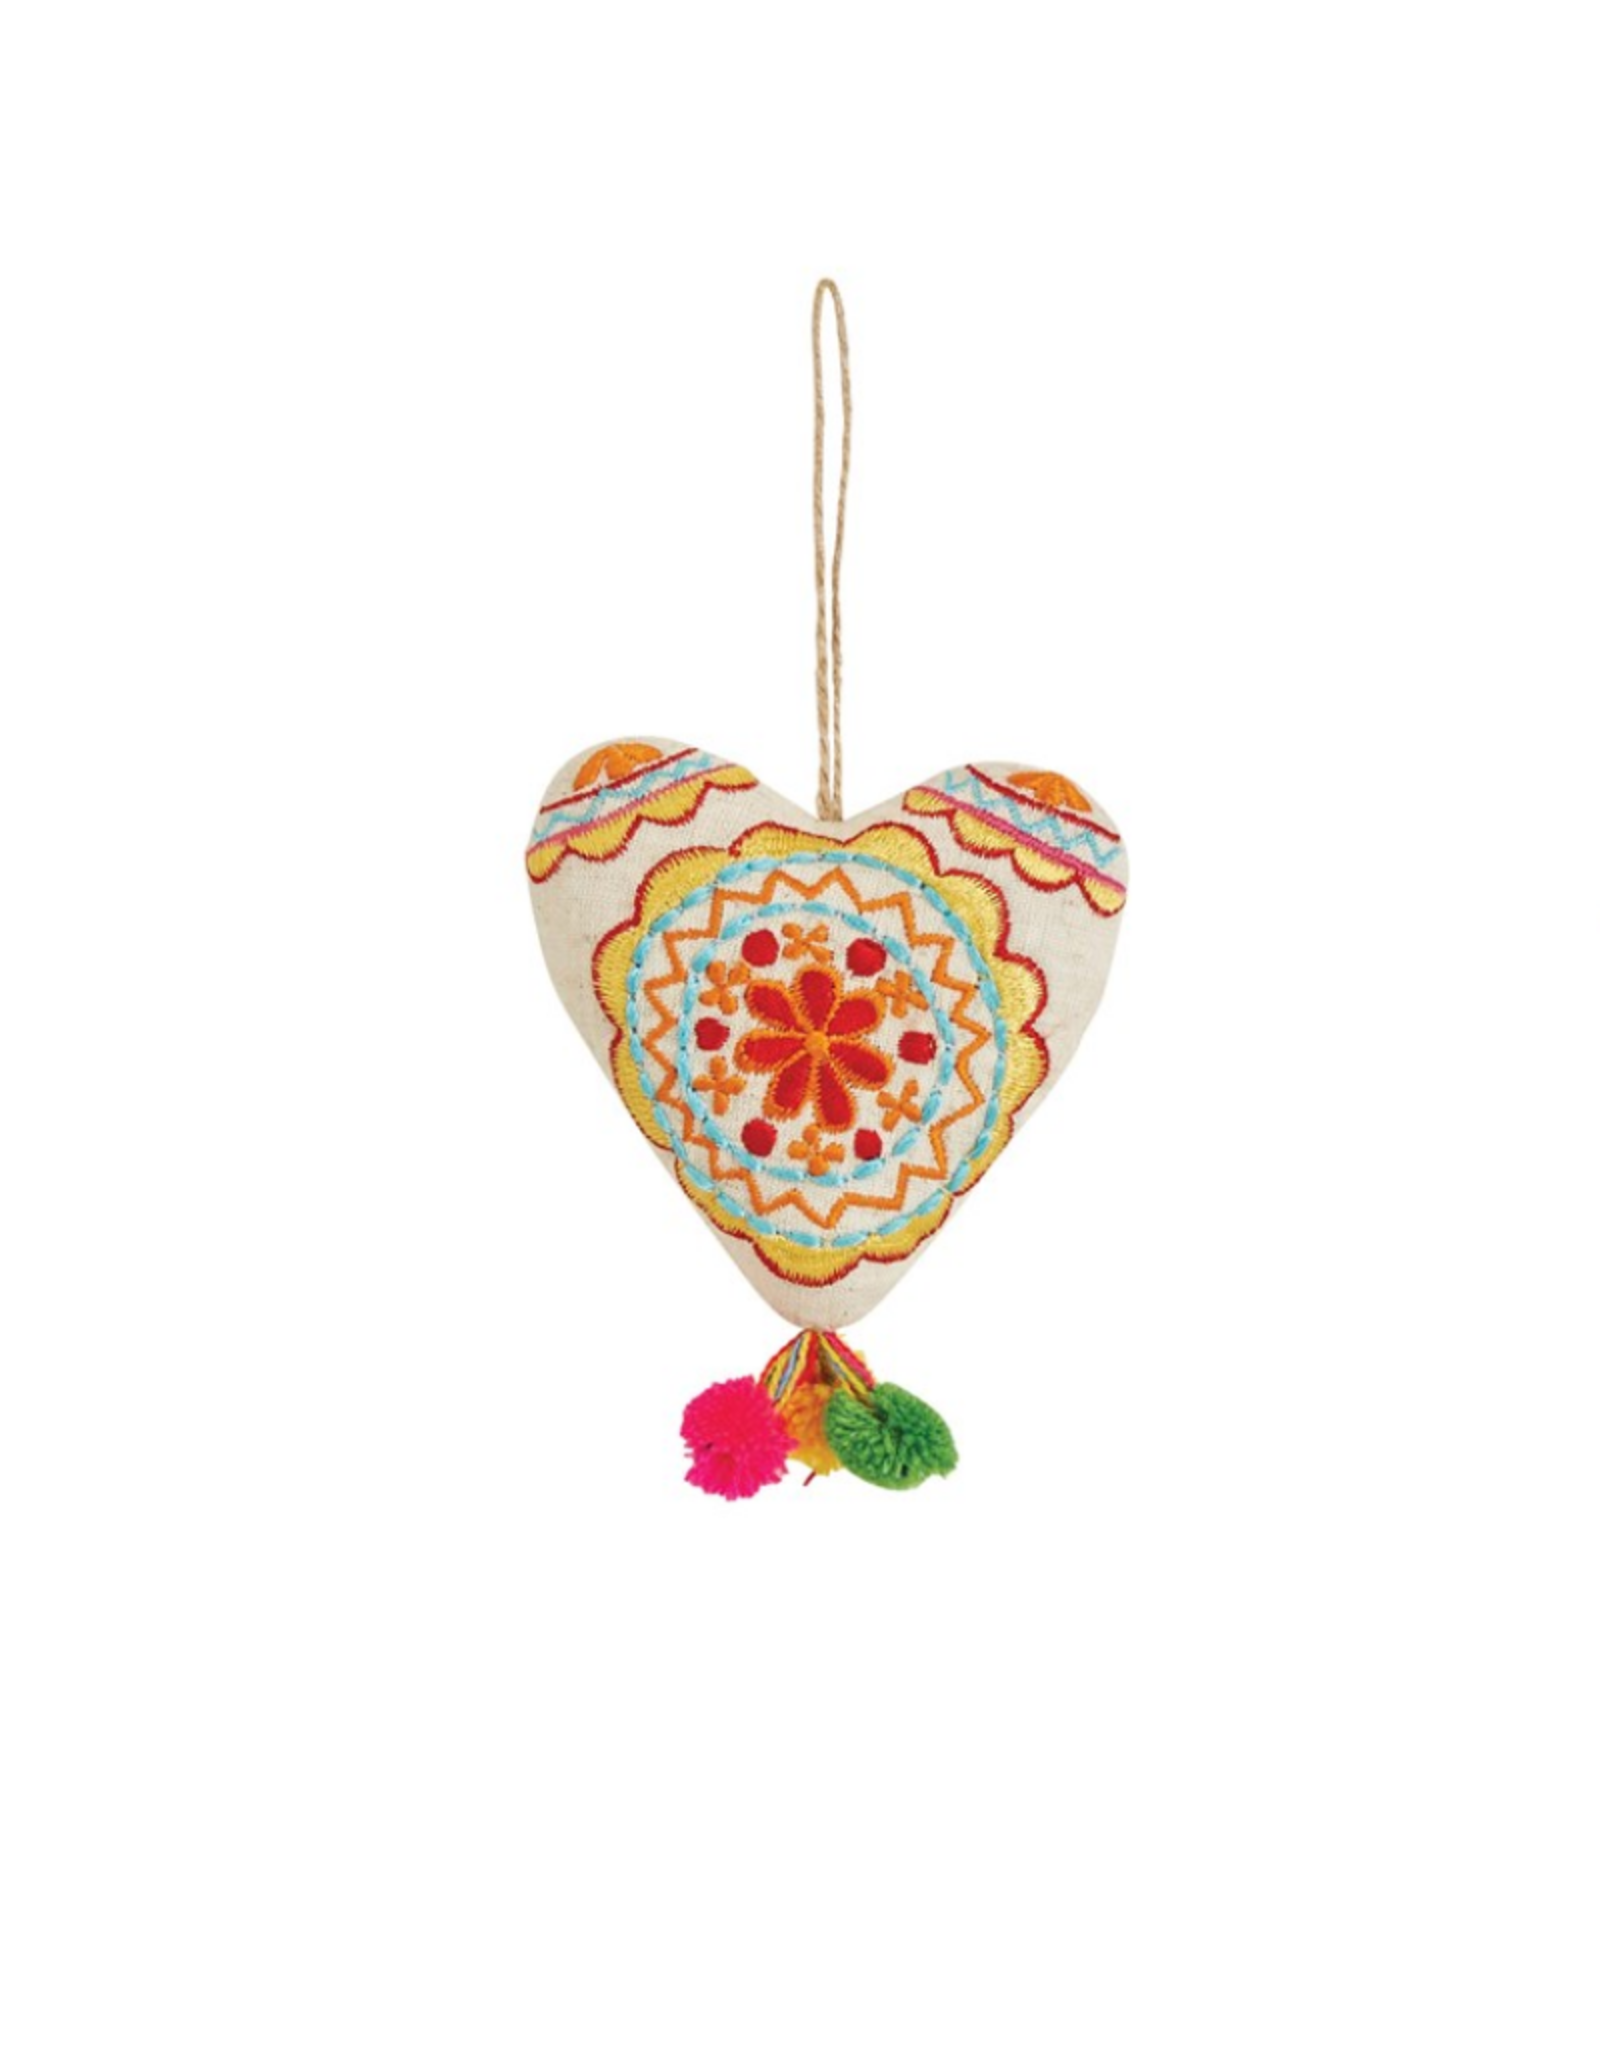 ORNAMENT-FELT-HEART EMBROIDERED 4"  W/ POM